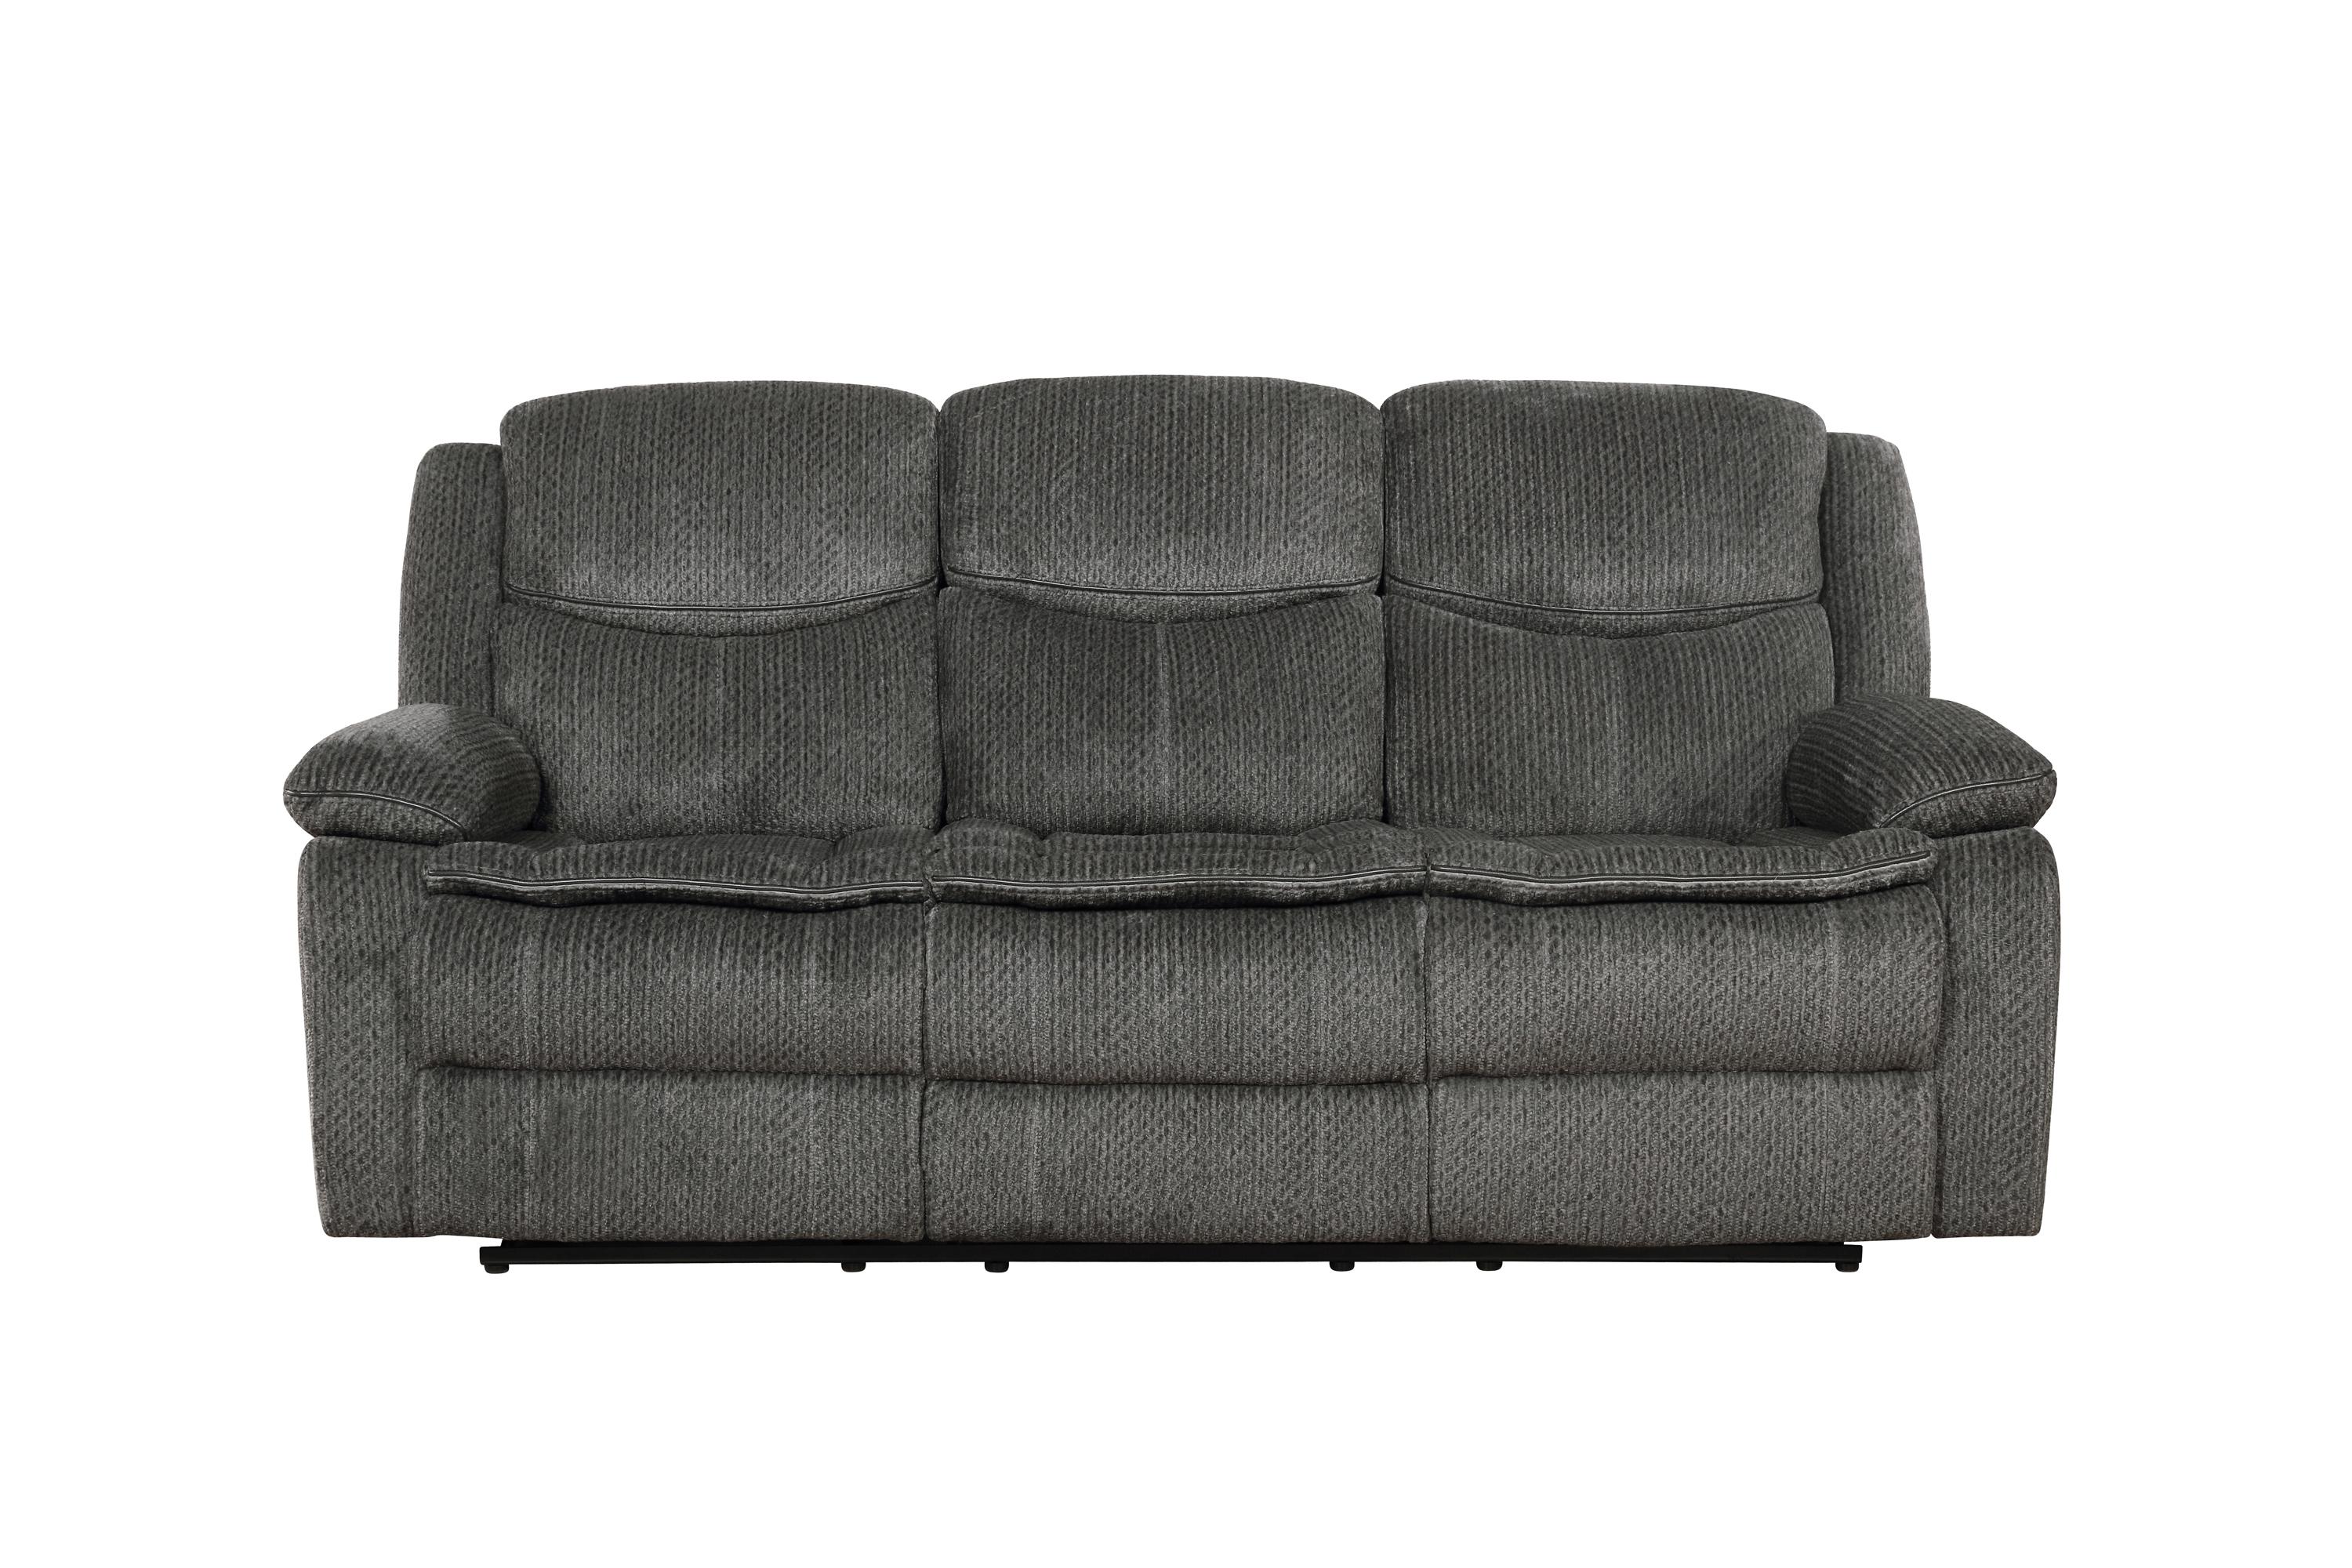 Modern Power sofa 610254P Jennings 610254P in Charcoal Chenille